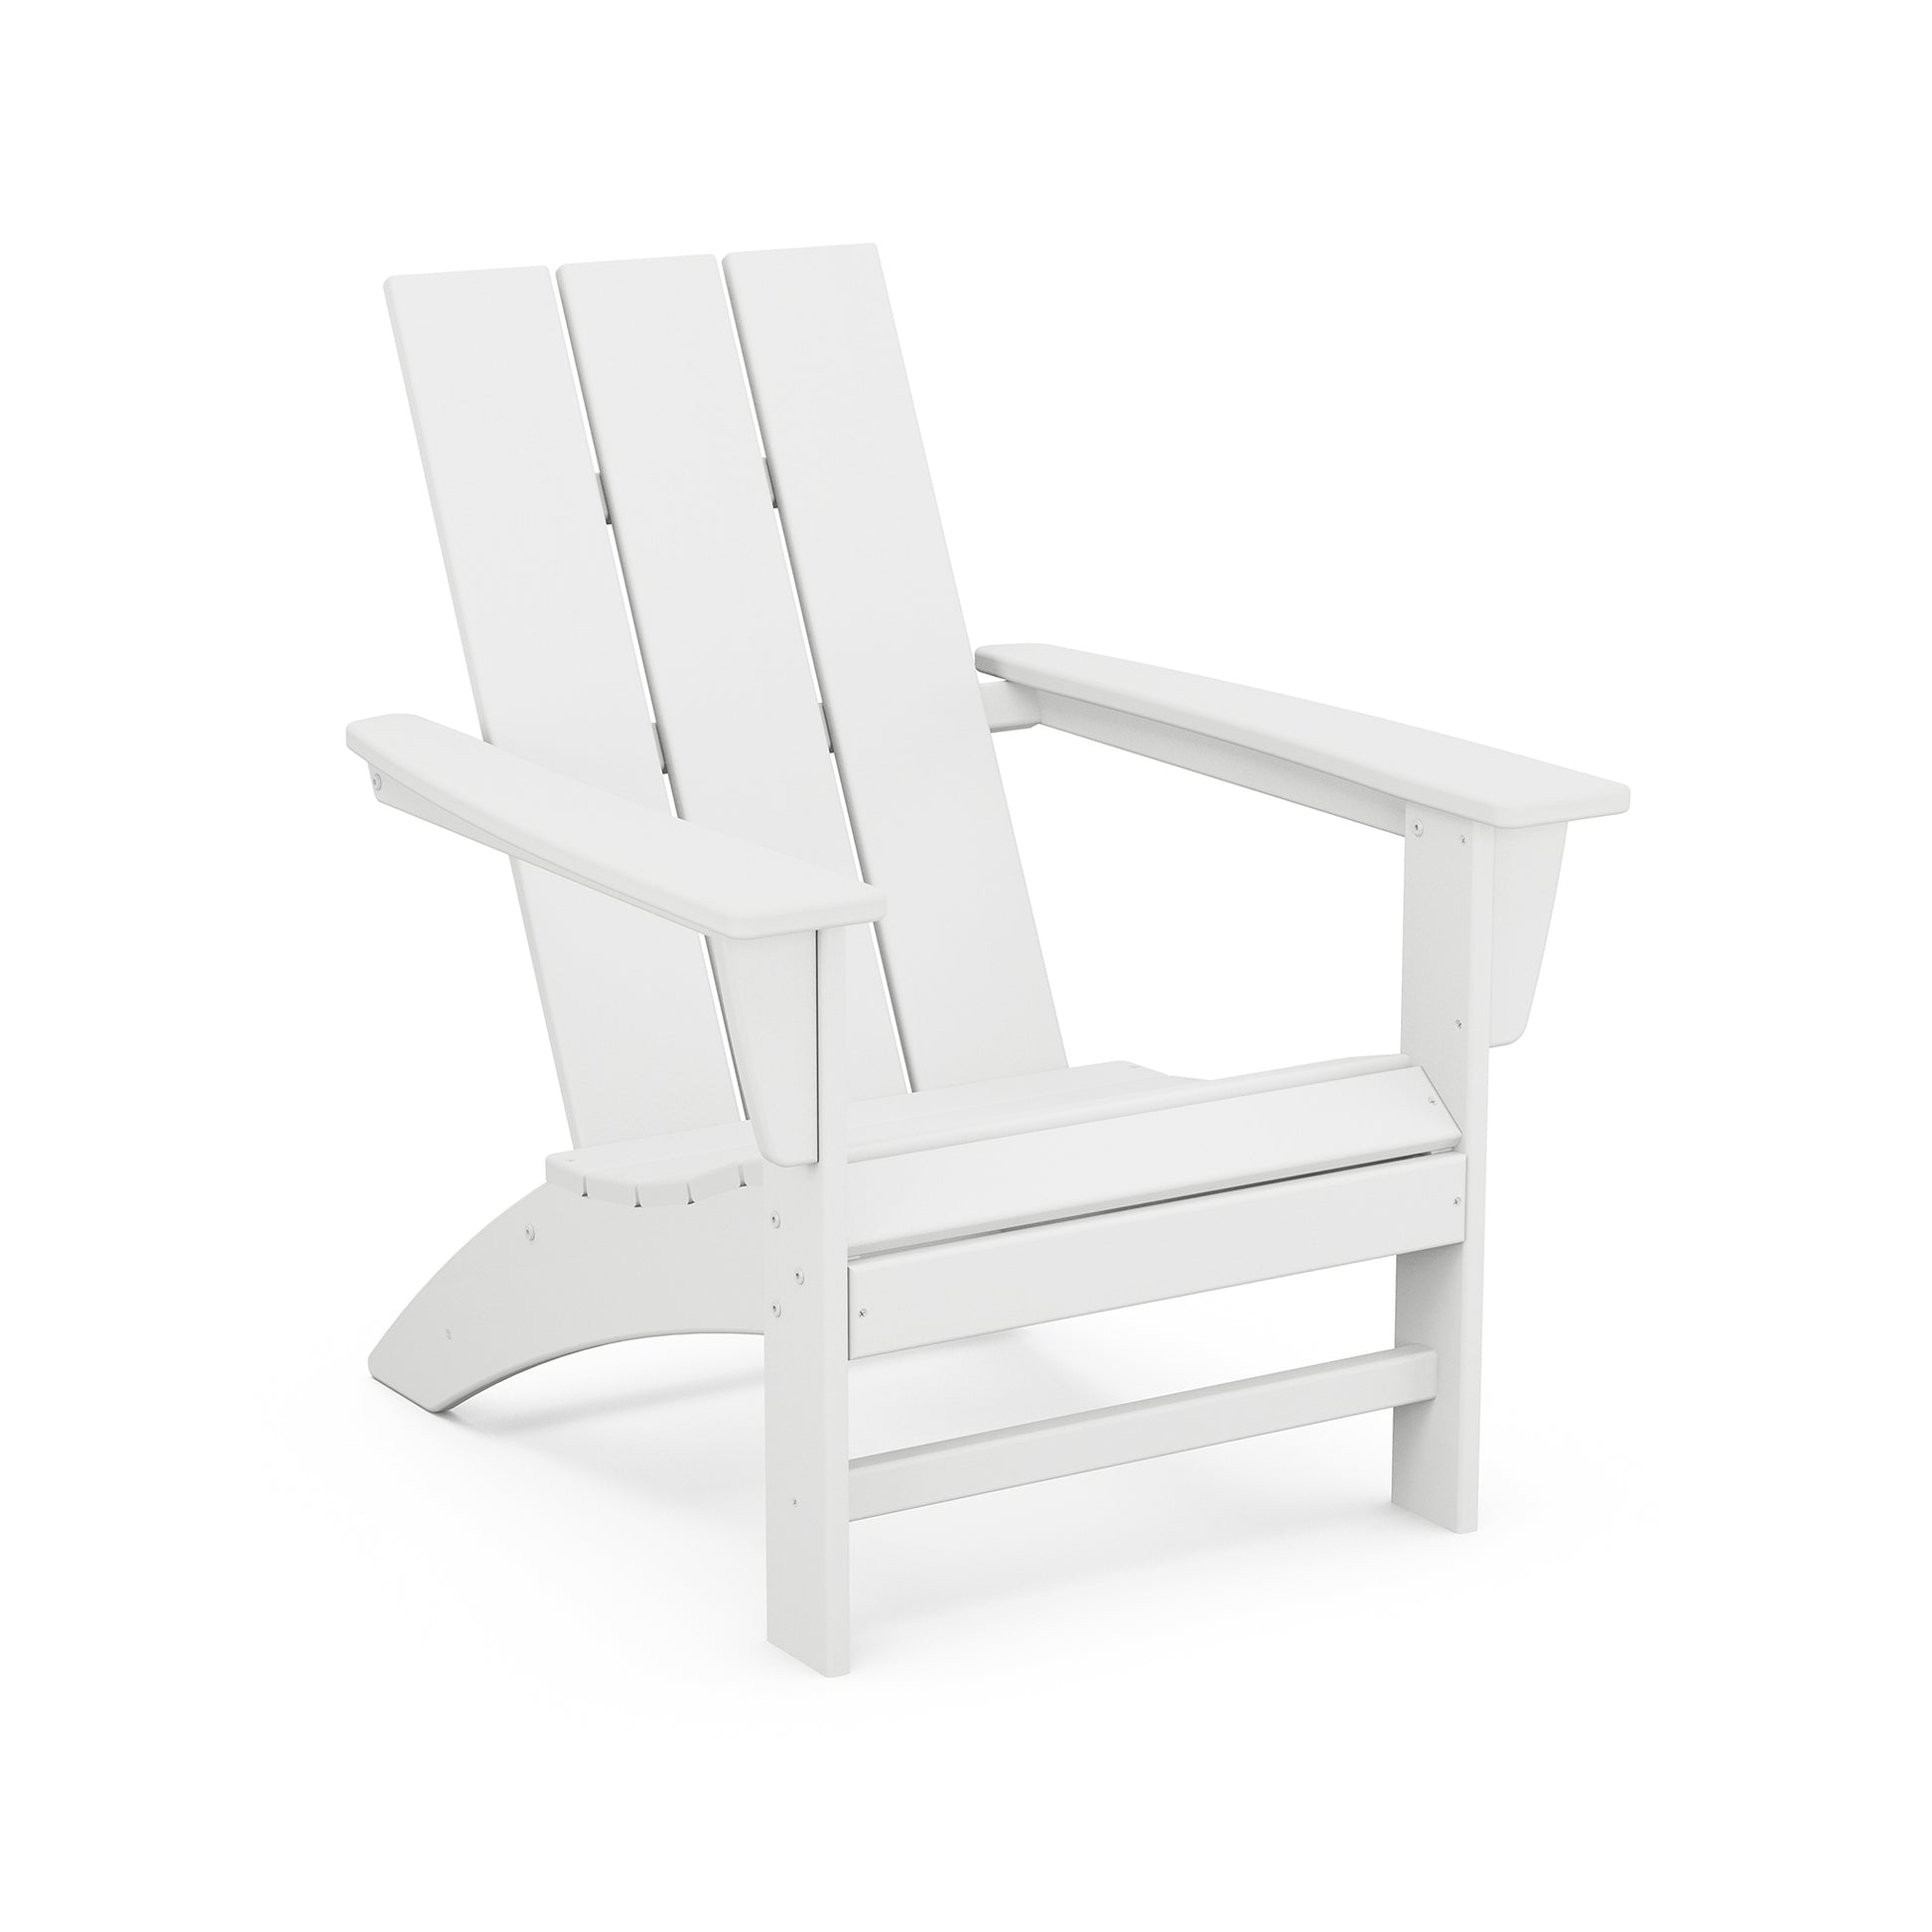 A POLYWOOD® Modern Adirondack chair on a white background.